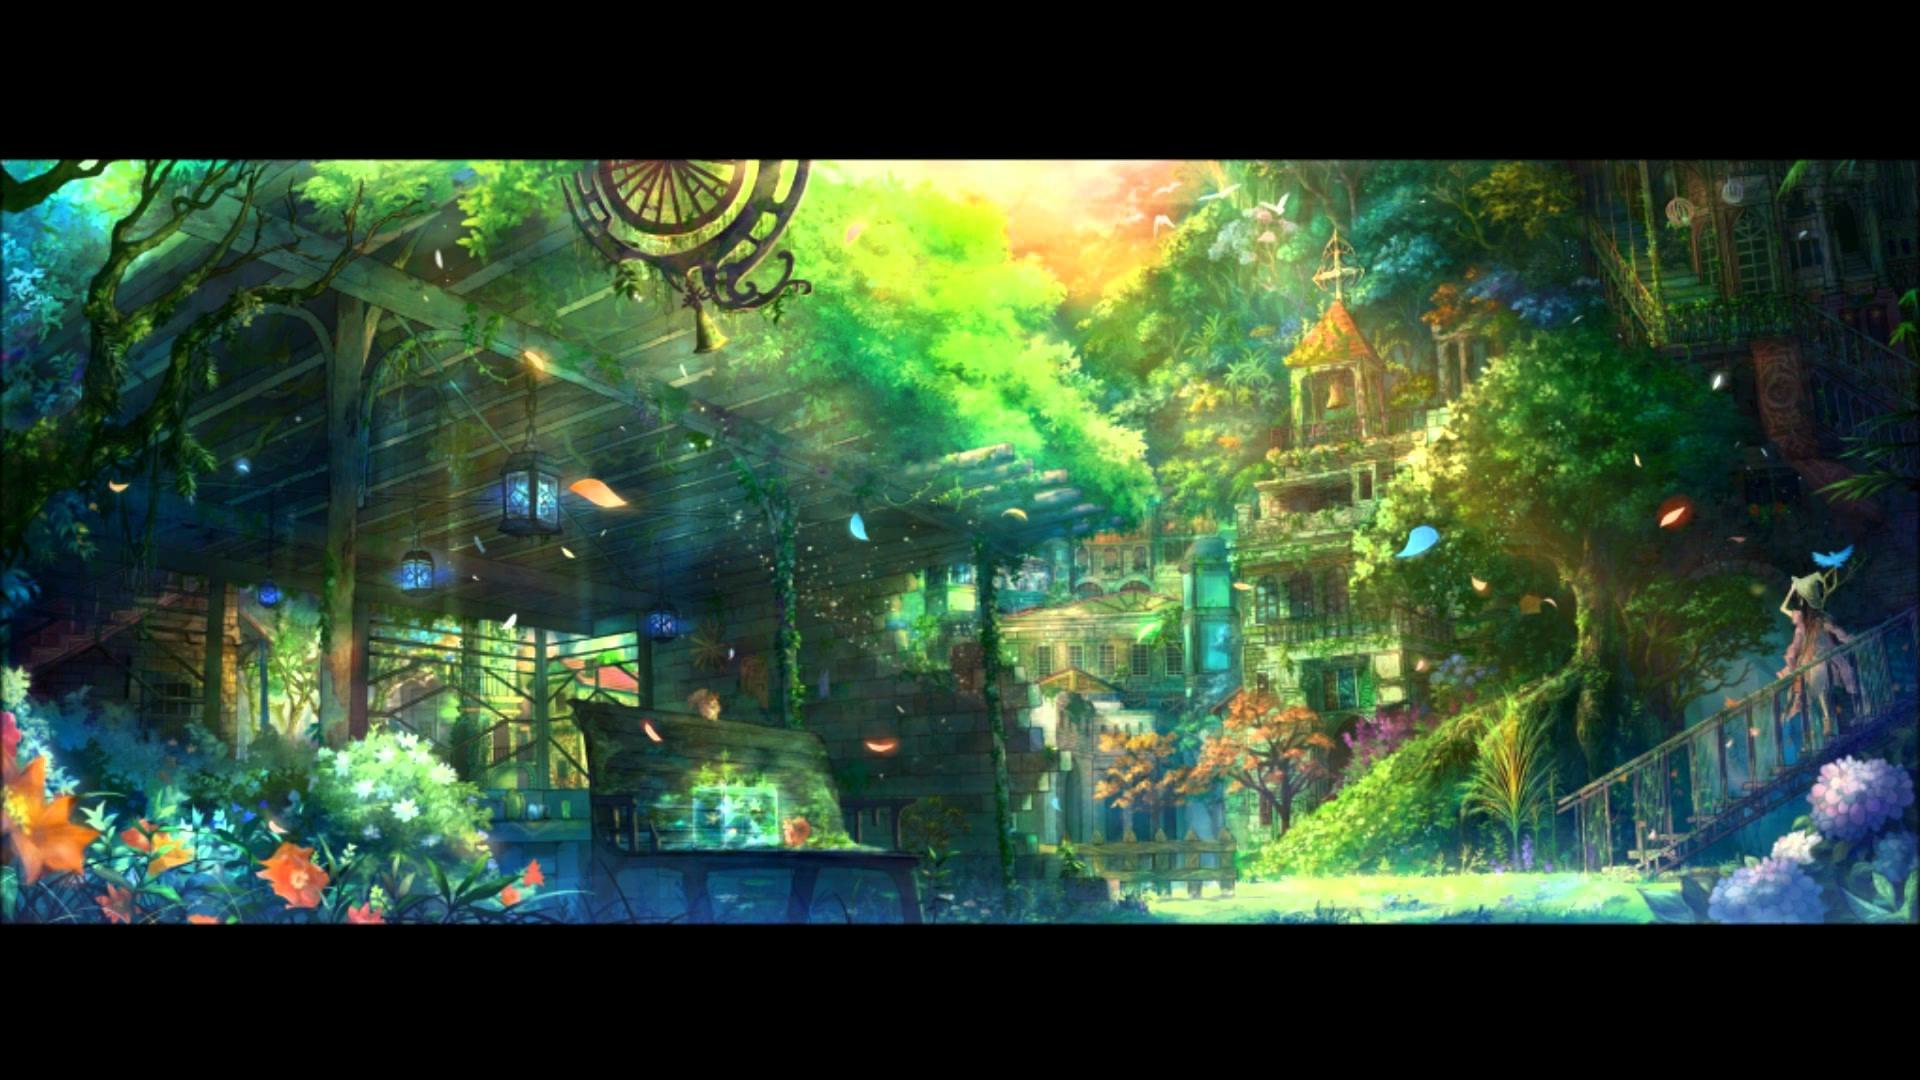 1920x1080 Return To Neverland OST - I'll try